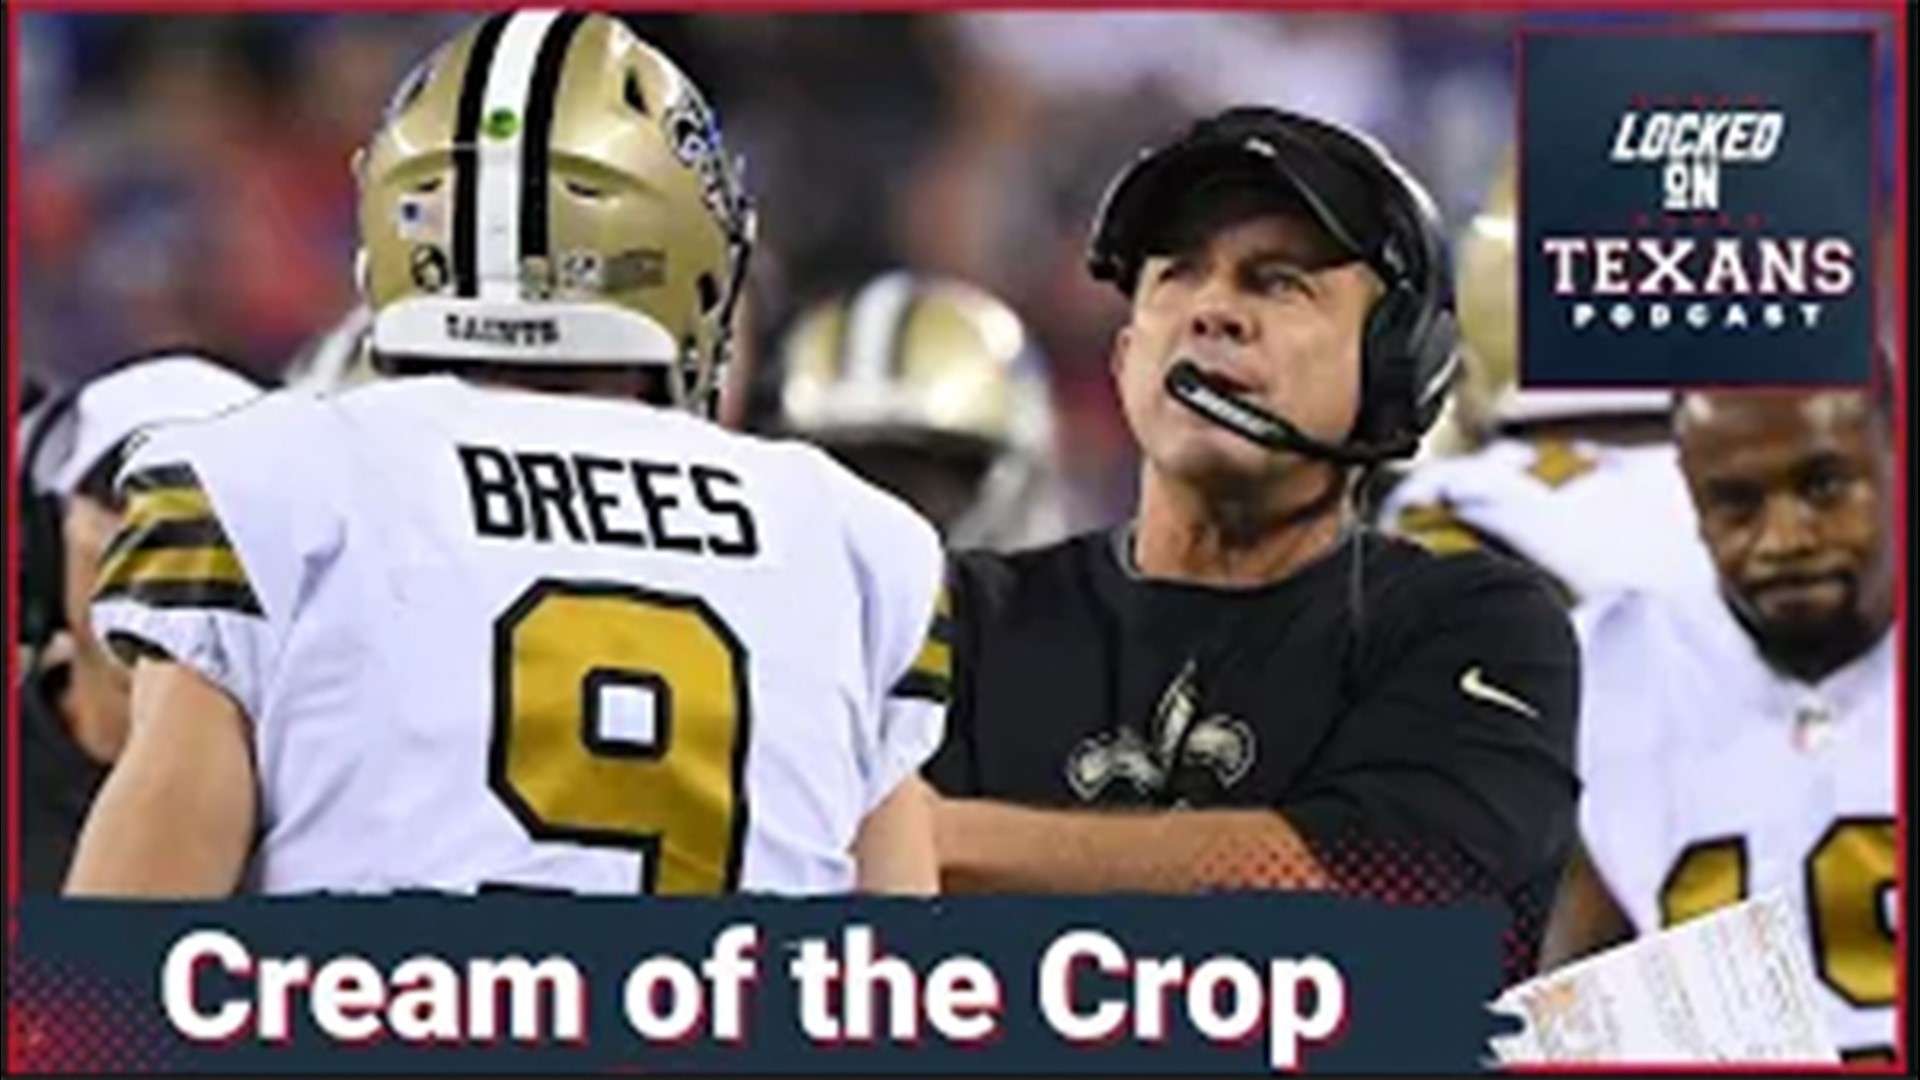 On this Thursday's installment of Locked On Texans, should the Houston Texans give up assets to land former New Orleans Saints coach Sean Payton?